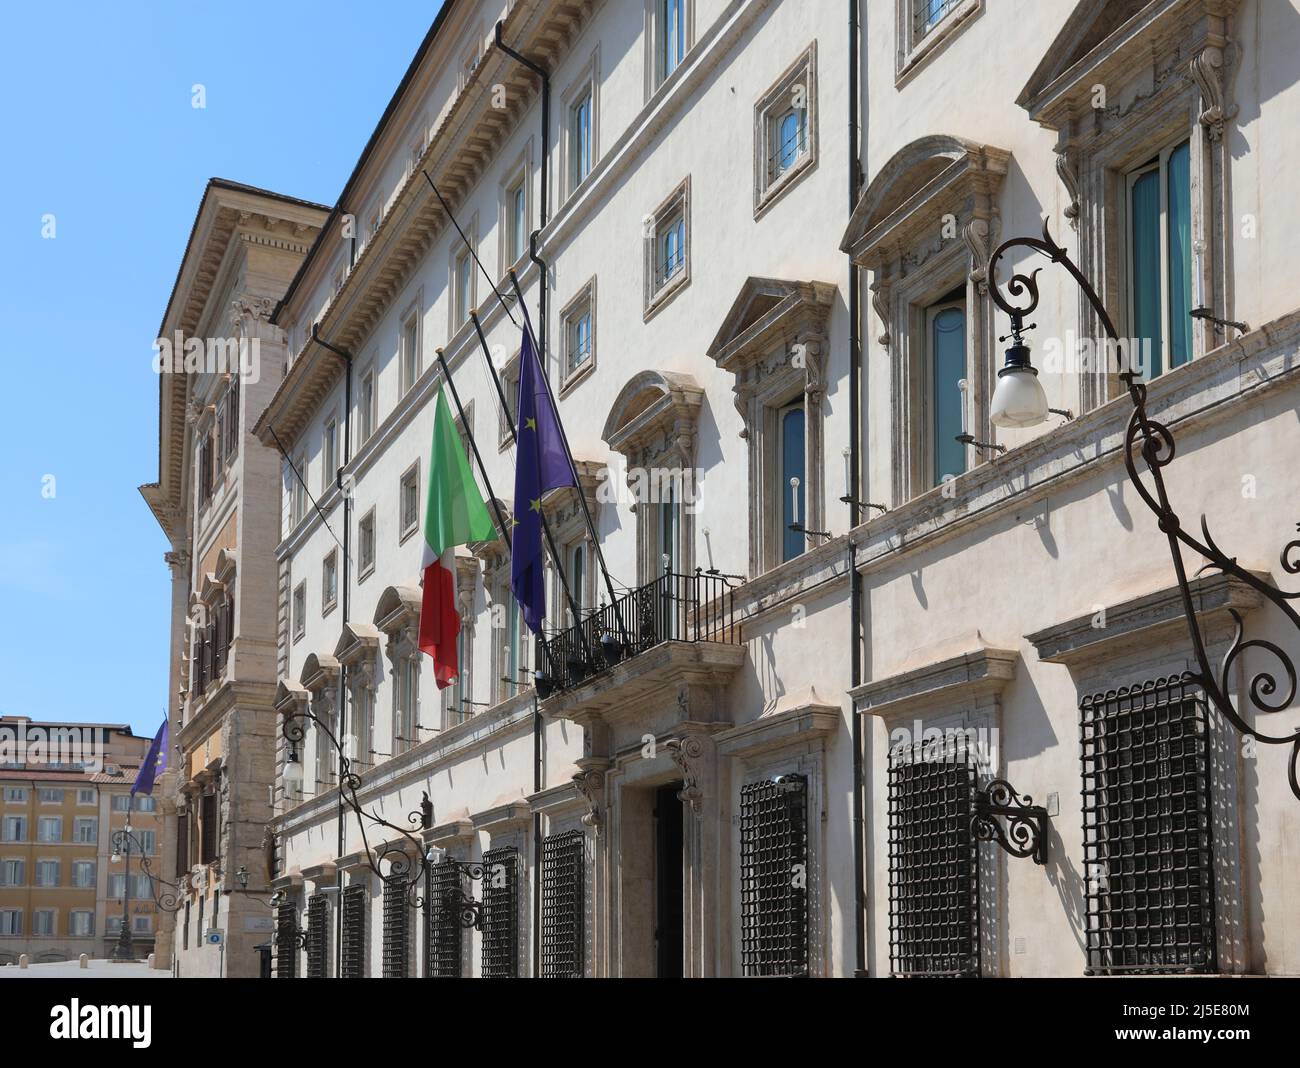 Rome, RM, Italy - August 18, 2020: Italian and European flag at the entrance of Palazzo Chigi seat of the Italian government without people Stock Photo